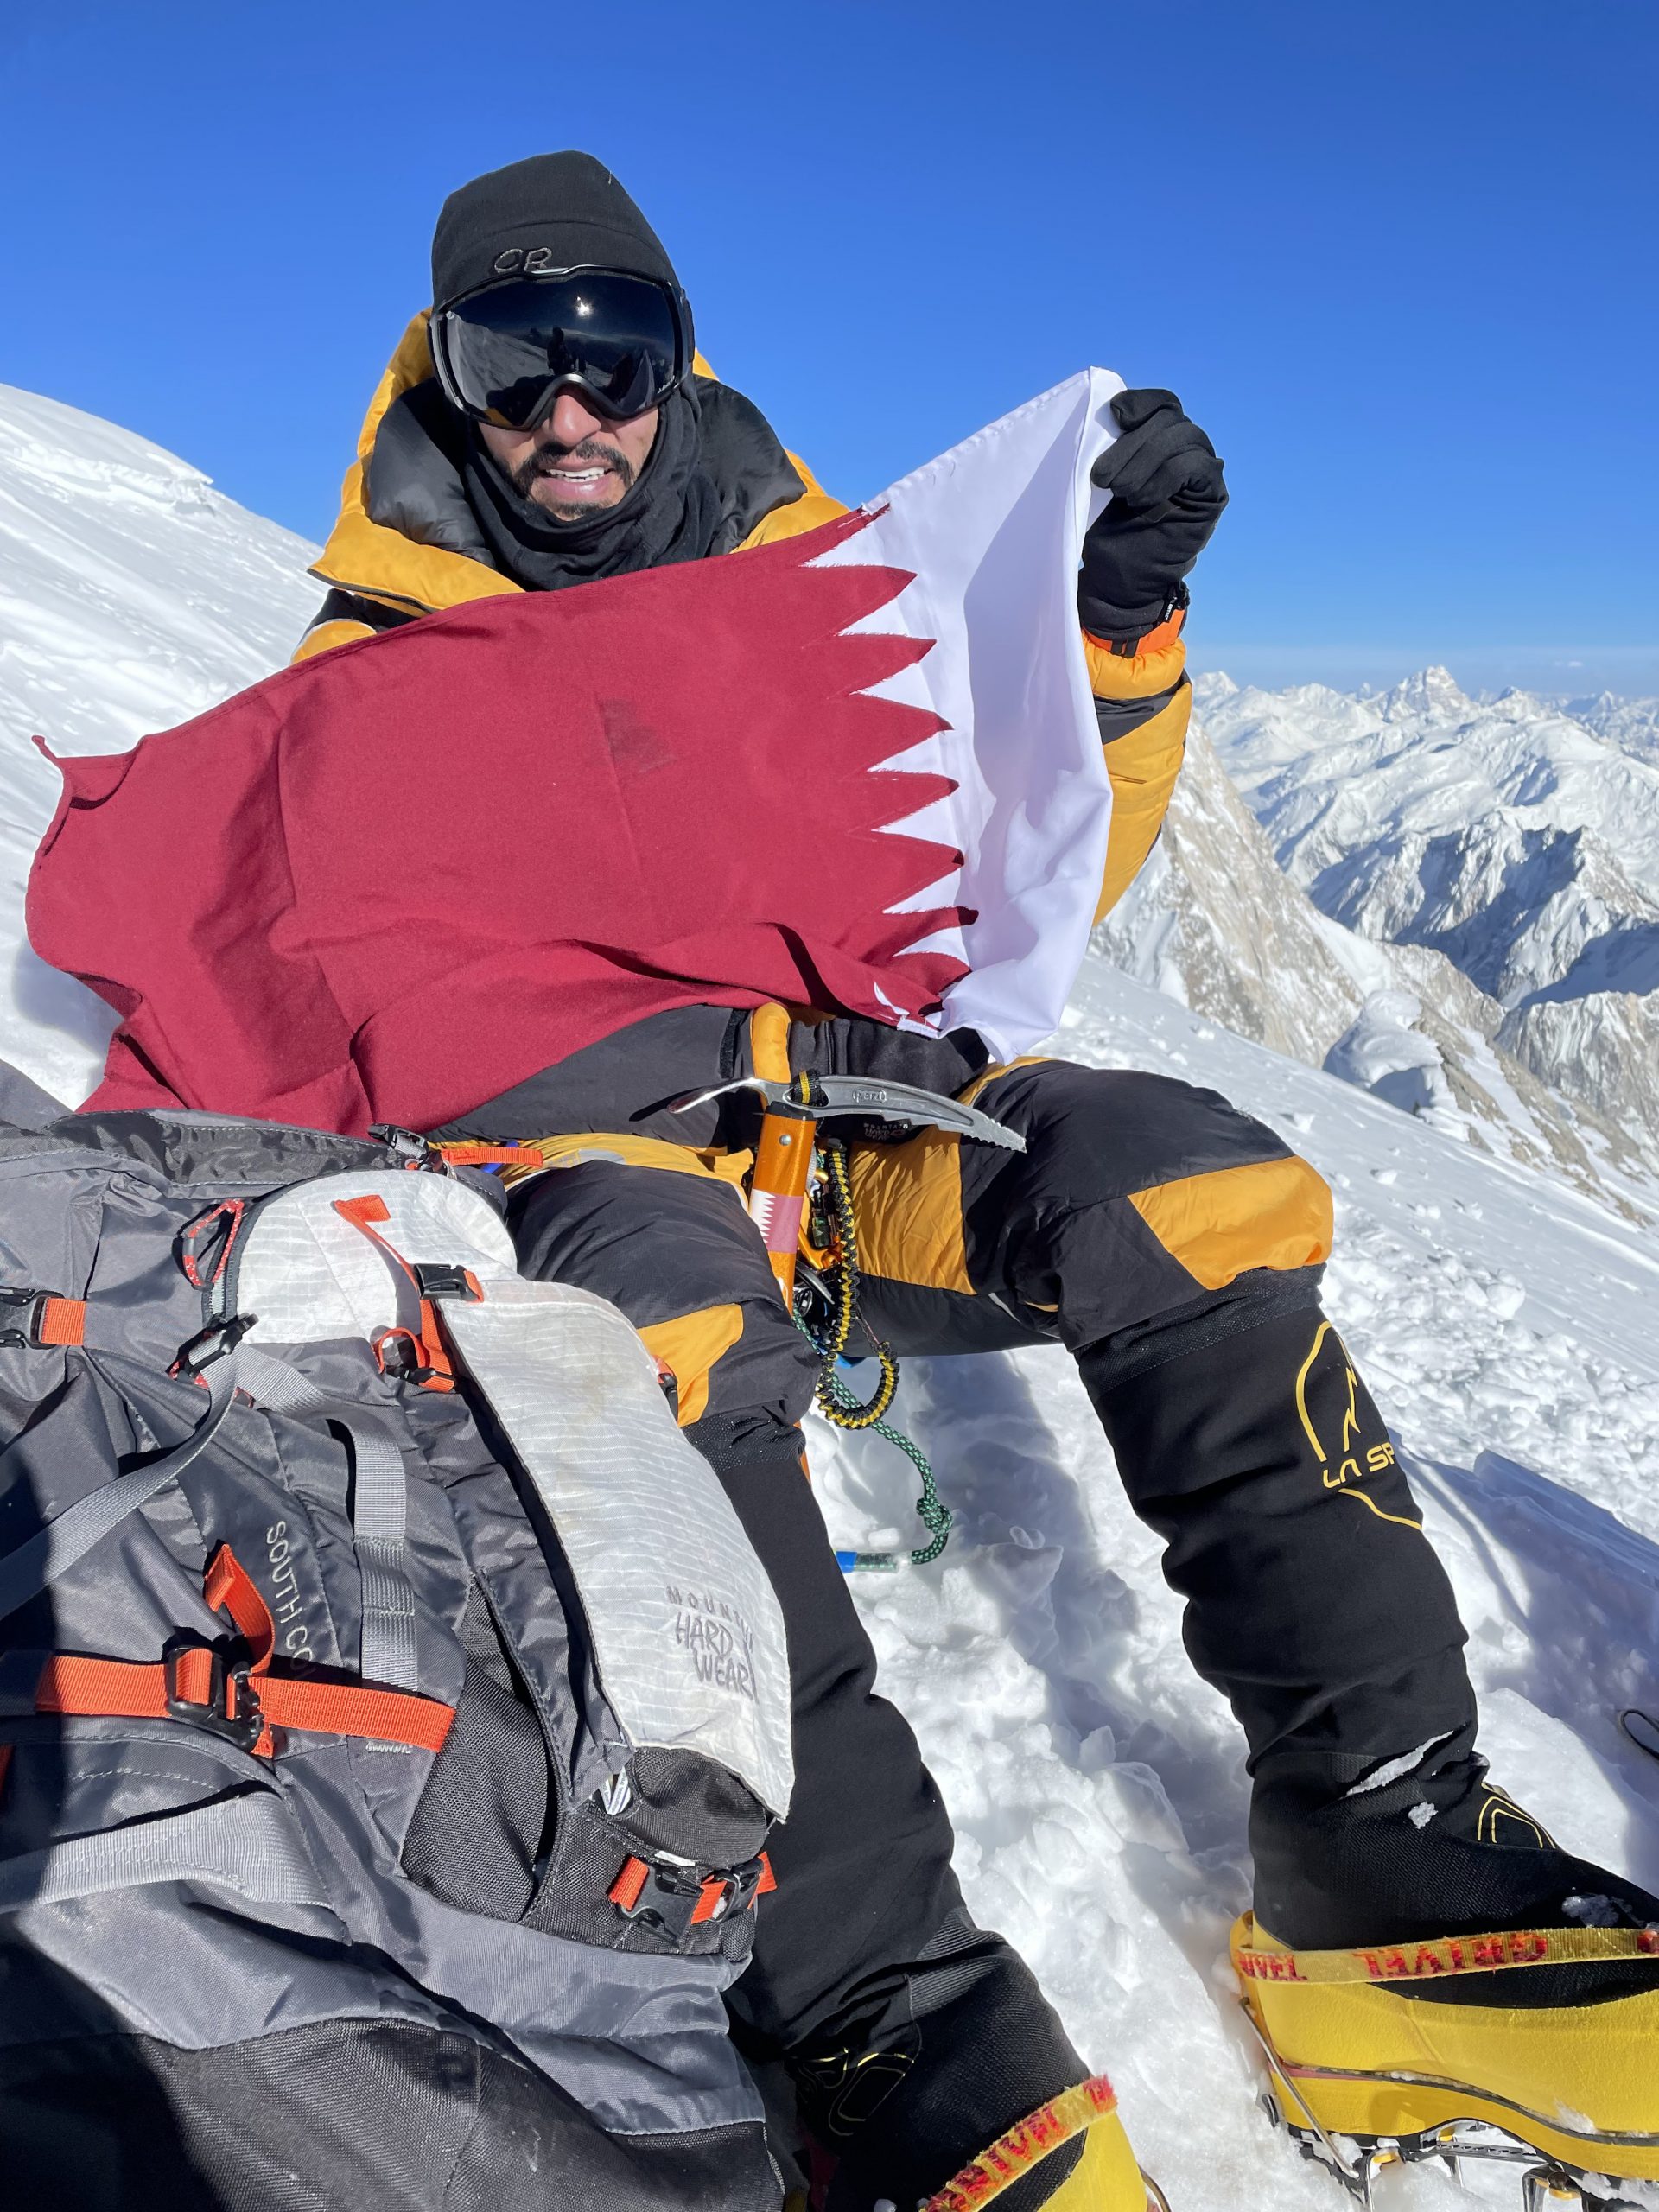 Qatari mountaineer Fahad Badar details his "frostbite" and amputation of his fingers